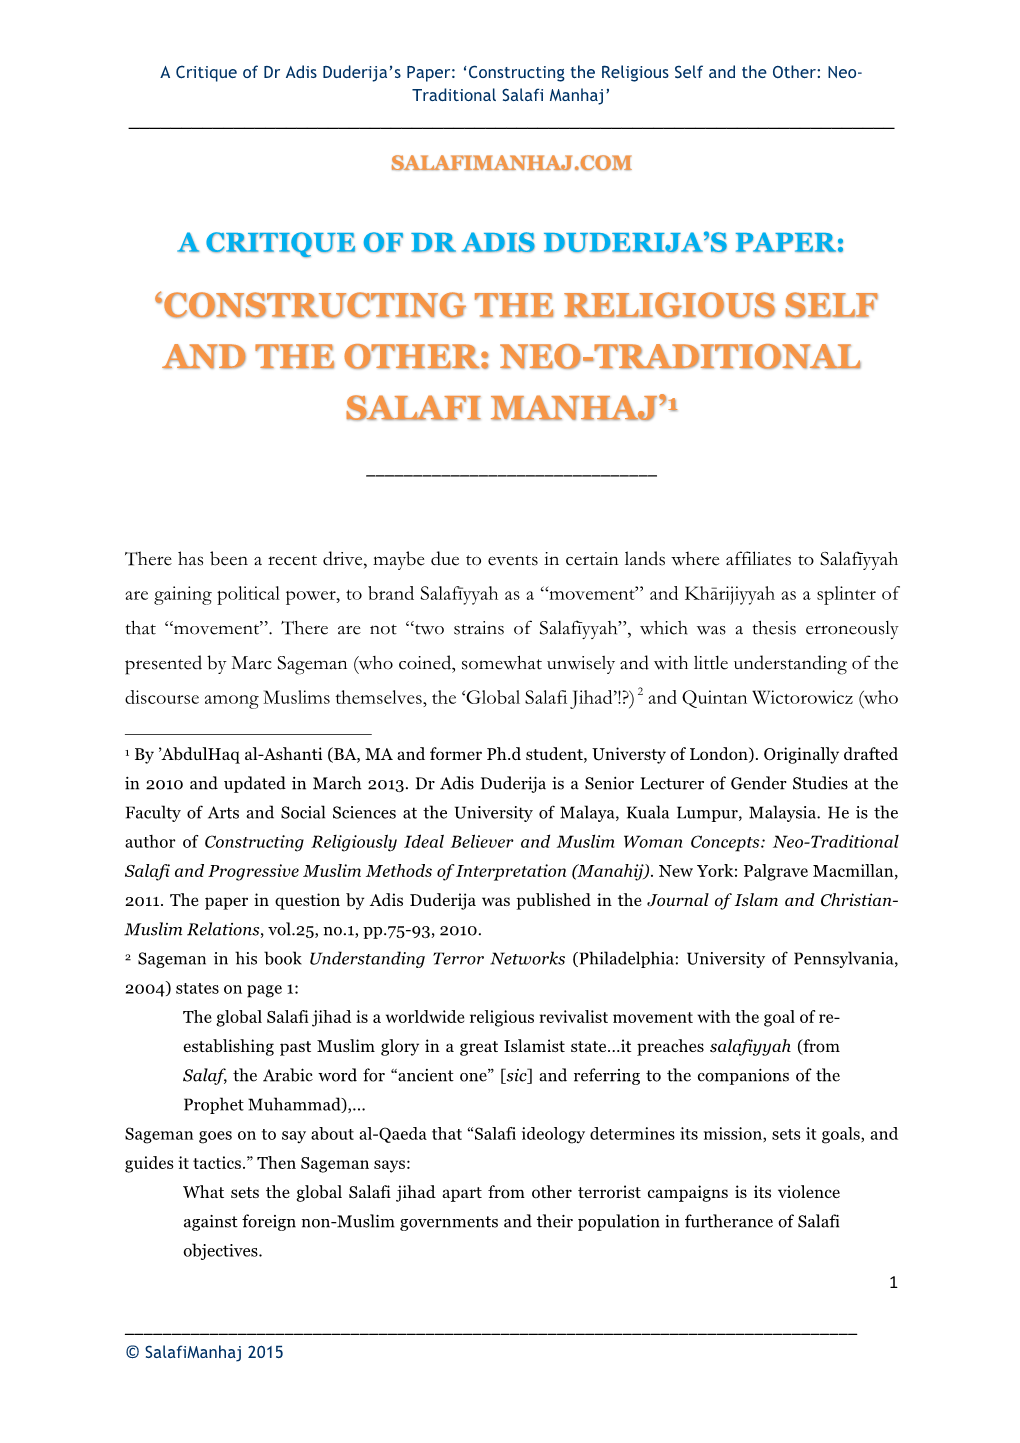 'Constructing the Religious Self and the Other: Neo-Traditional Salafi Manhaj'1